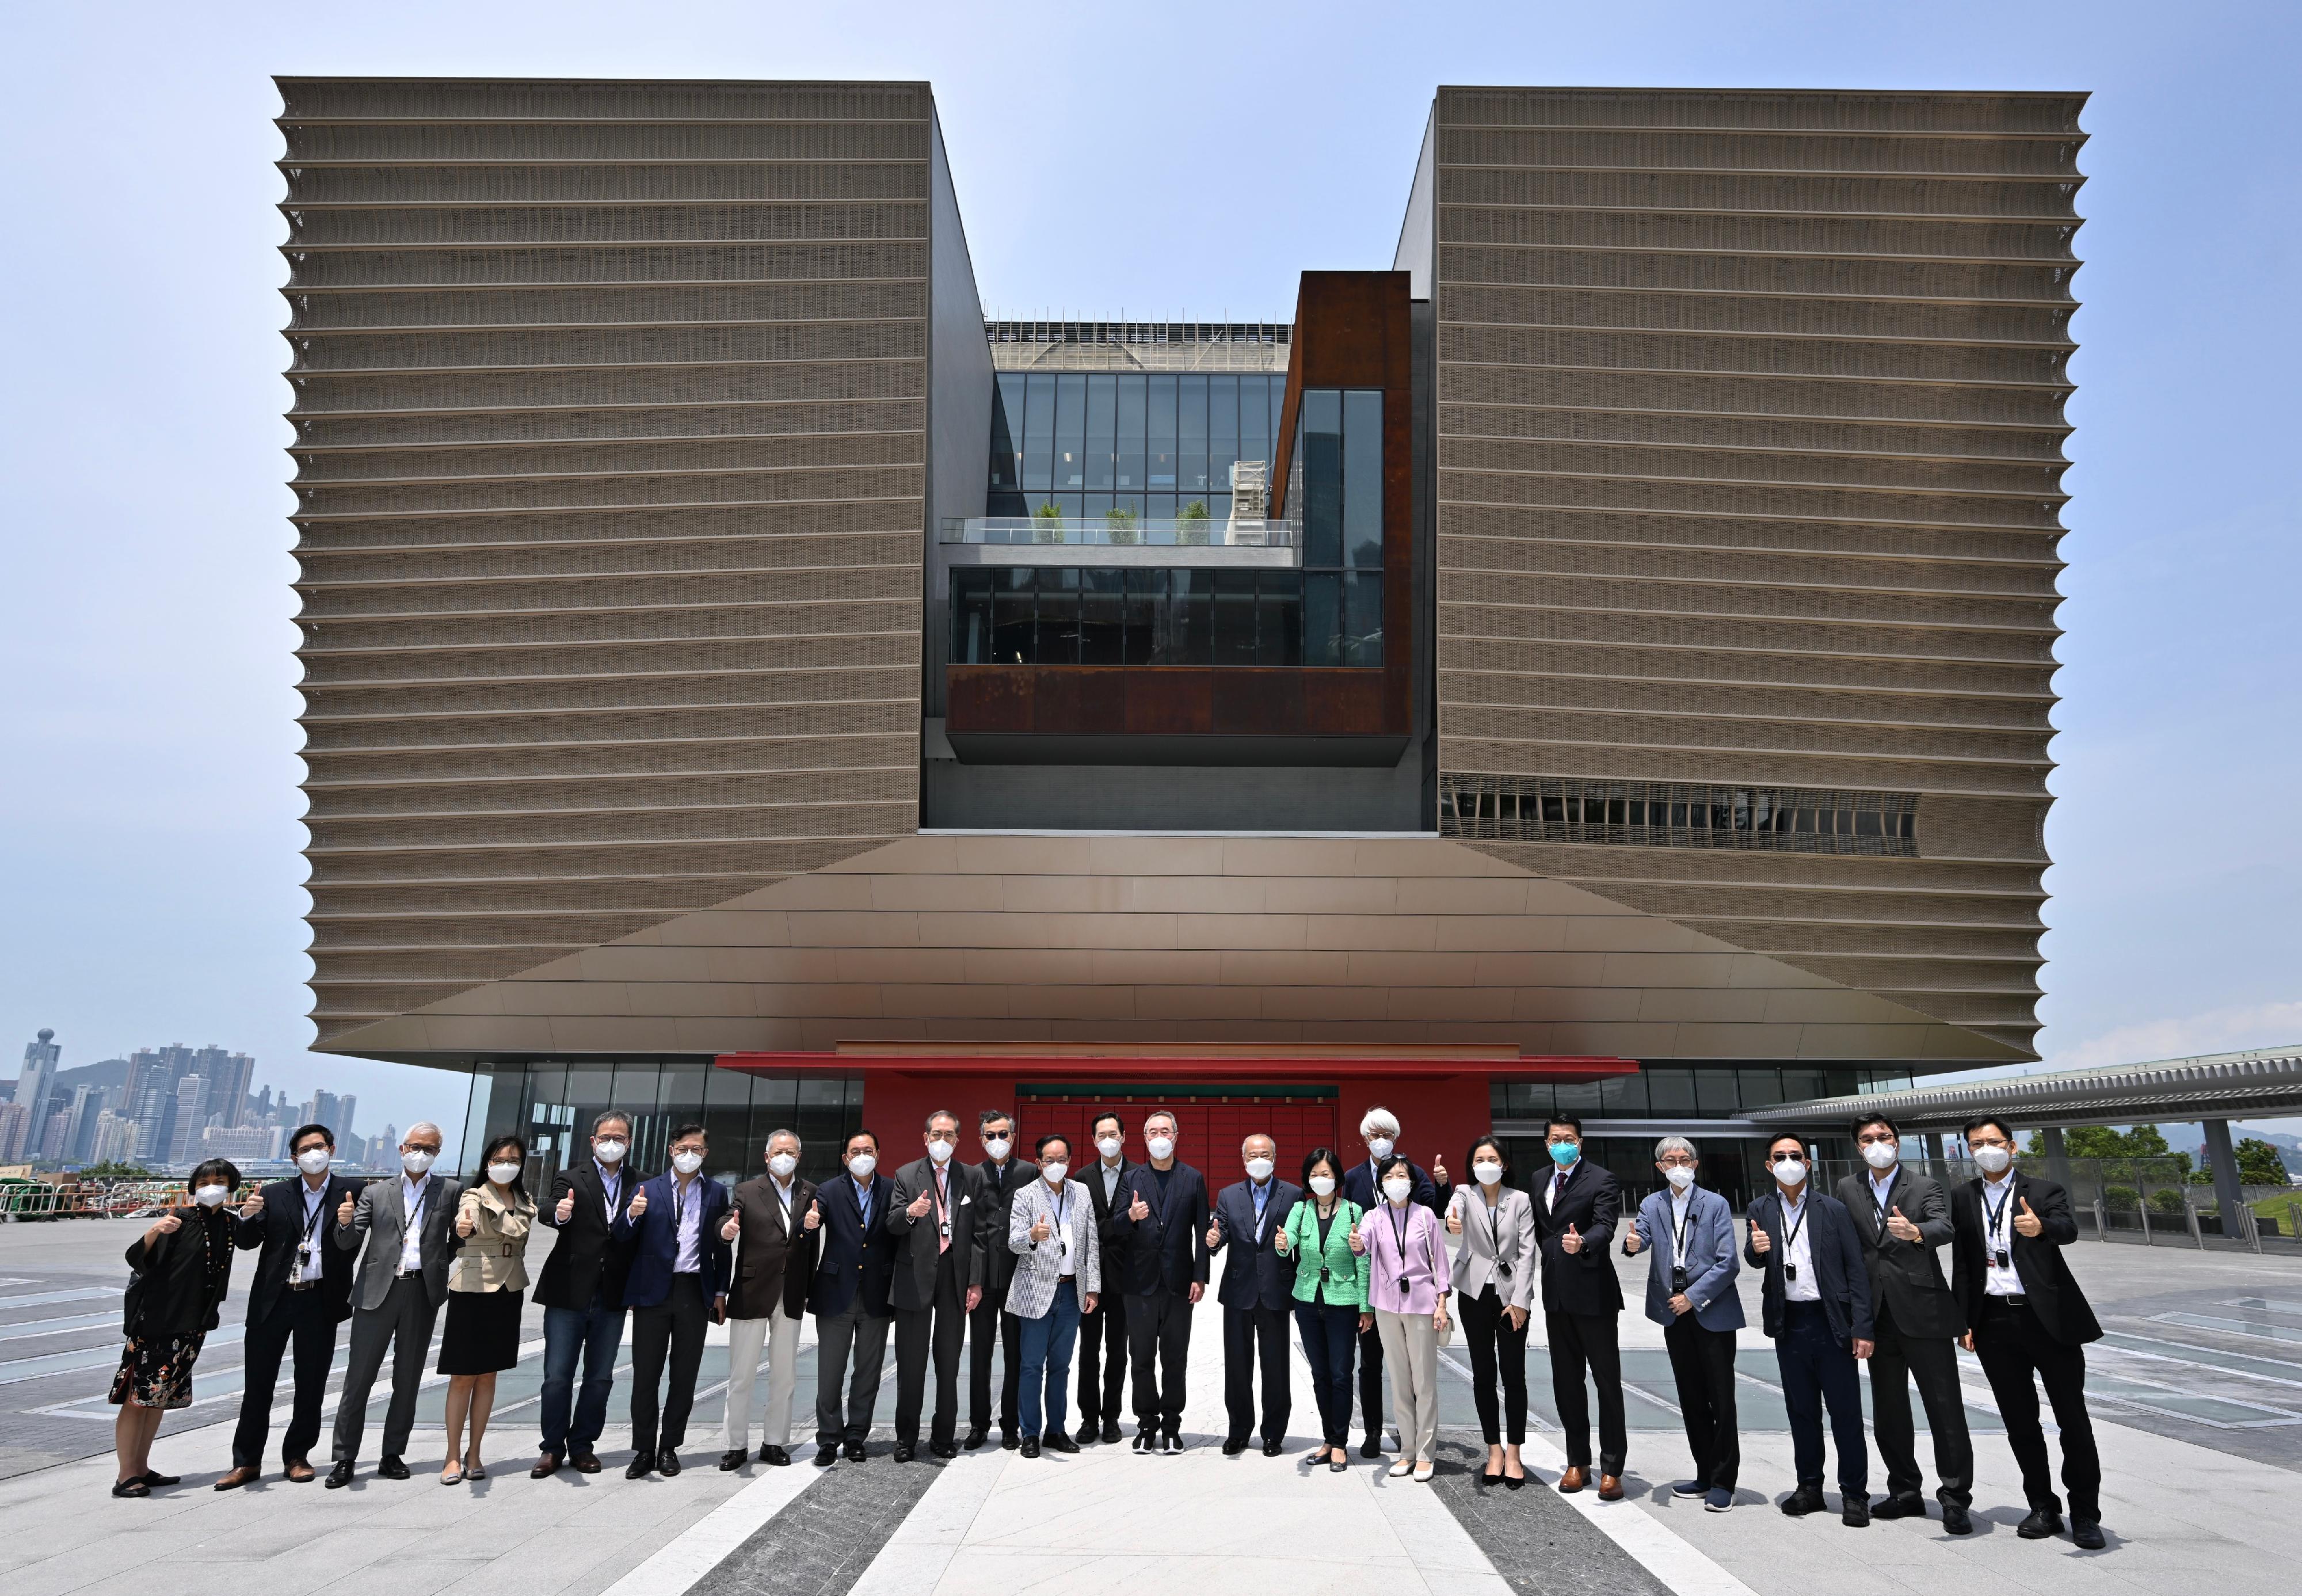 Non-official Members of the Executive Council (ExCo Non-official Members) today (May 5) visited the Hong Kong Palace Museum (HKPM) at the West Kowloon Cultural District. Photo shows ExCo Non-official Members with the Acting Secretary for Home Affairs, Mr Jack Chan (fifth right); the Chairman of the Board of the West Kowloon Cultural District Authority (WKCDA), Mr Henry Tang (11th right); and representatives of the WKCDA in front of the HKPM.